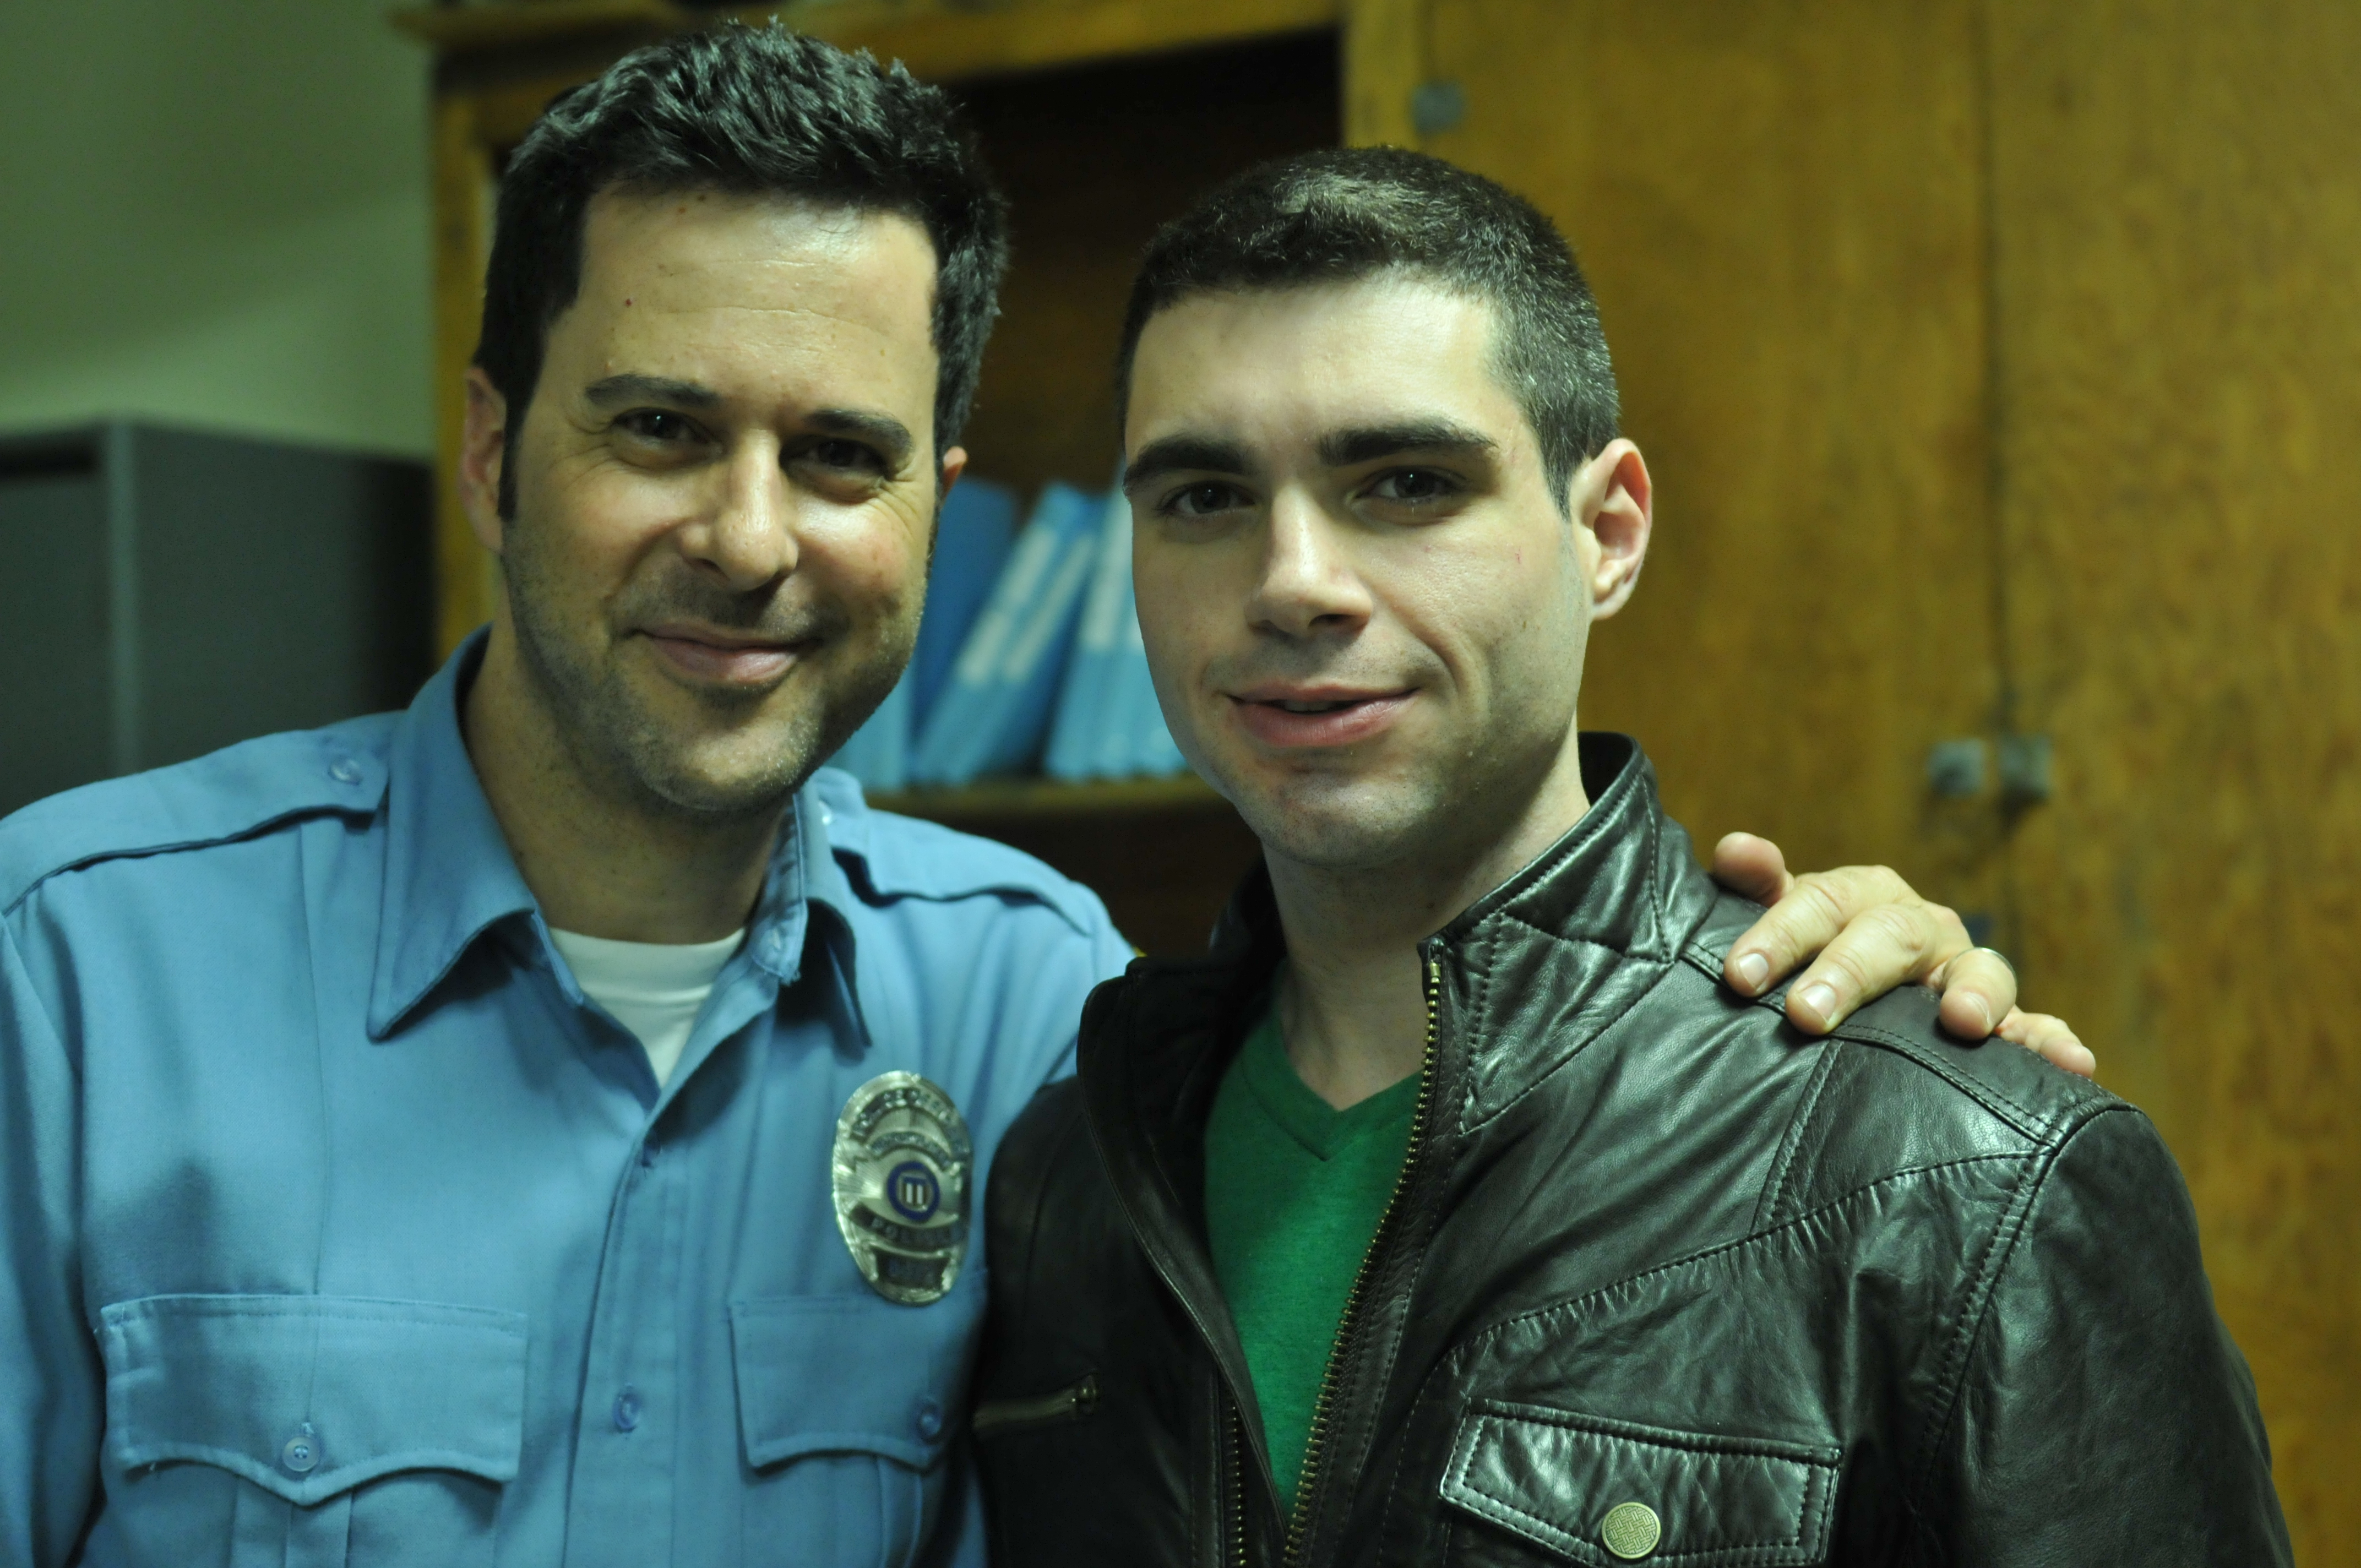 Tommy with Jonathan Silverman on the set of Inkubus.